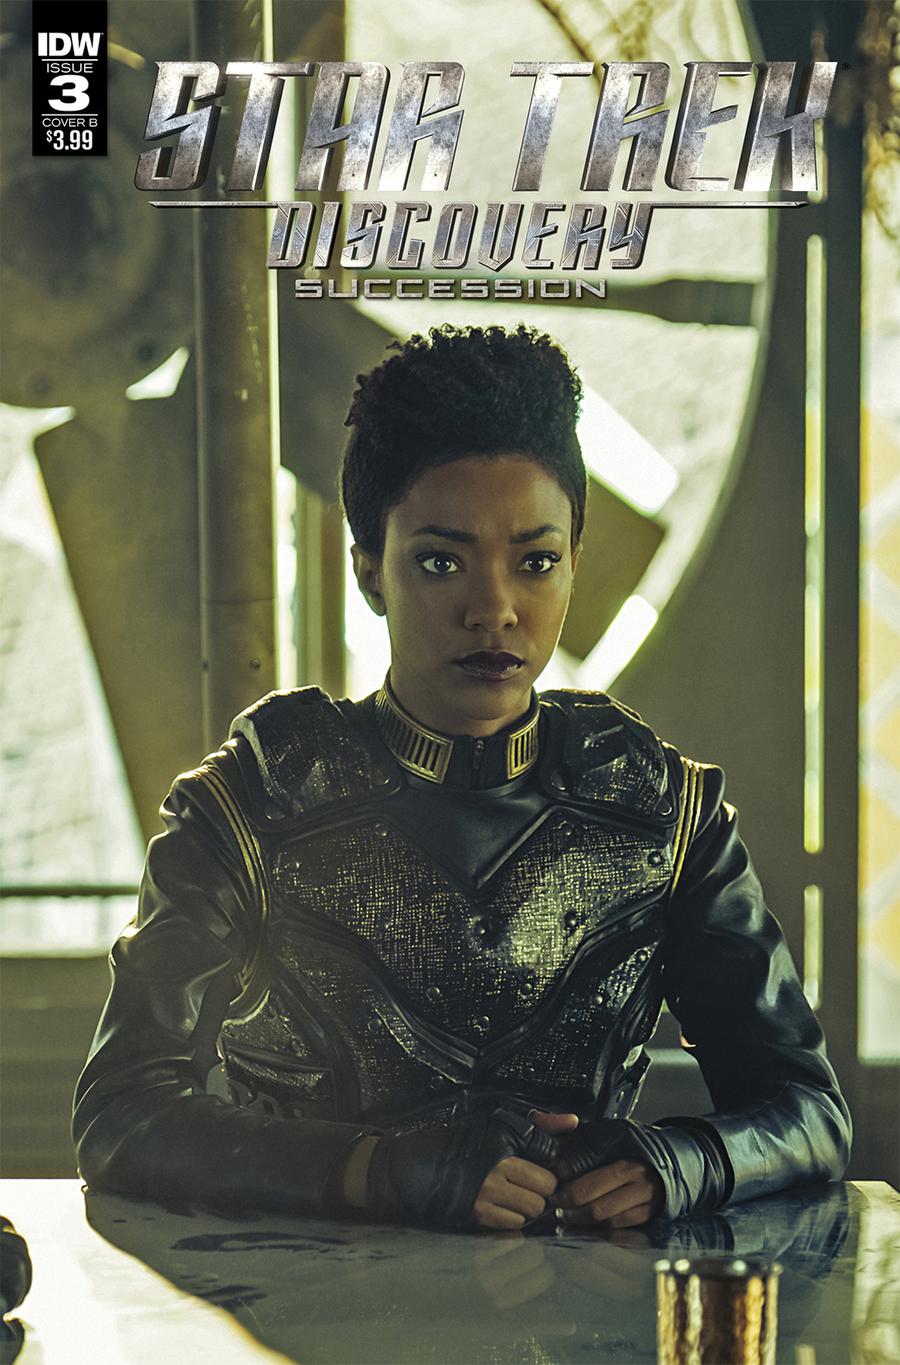 Star Trek Discovery Succession #3 Cover B Variant Photo Cover